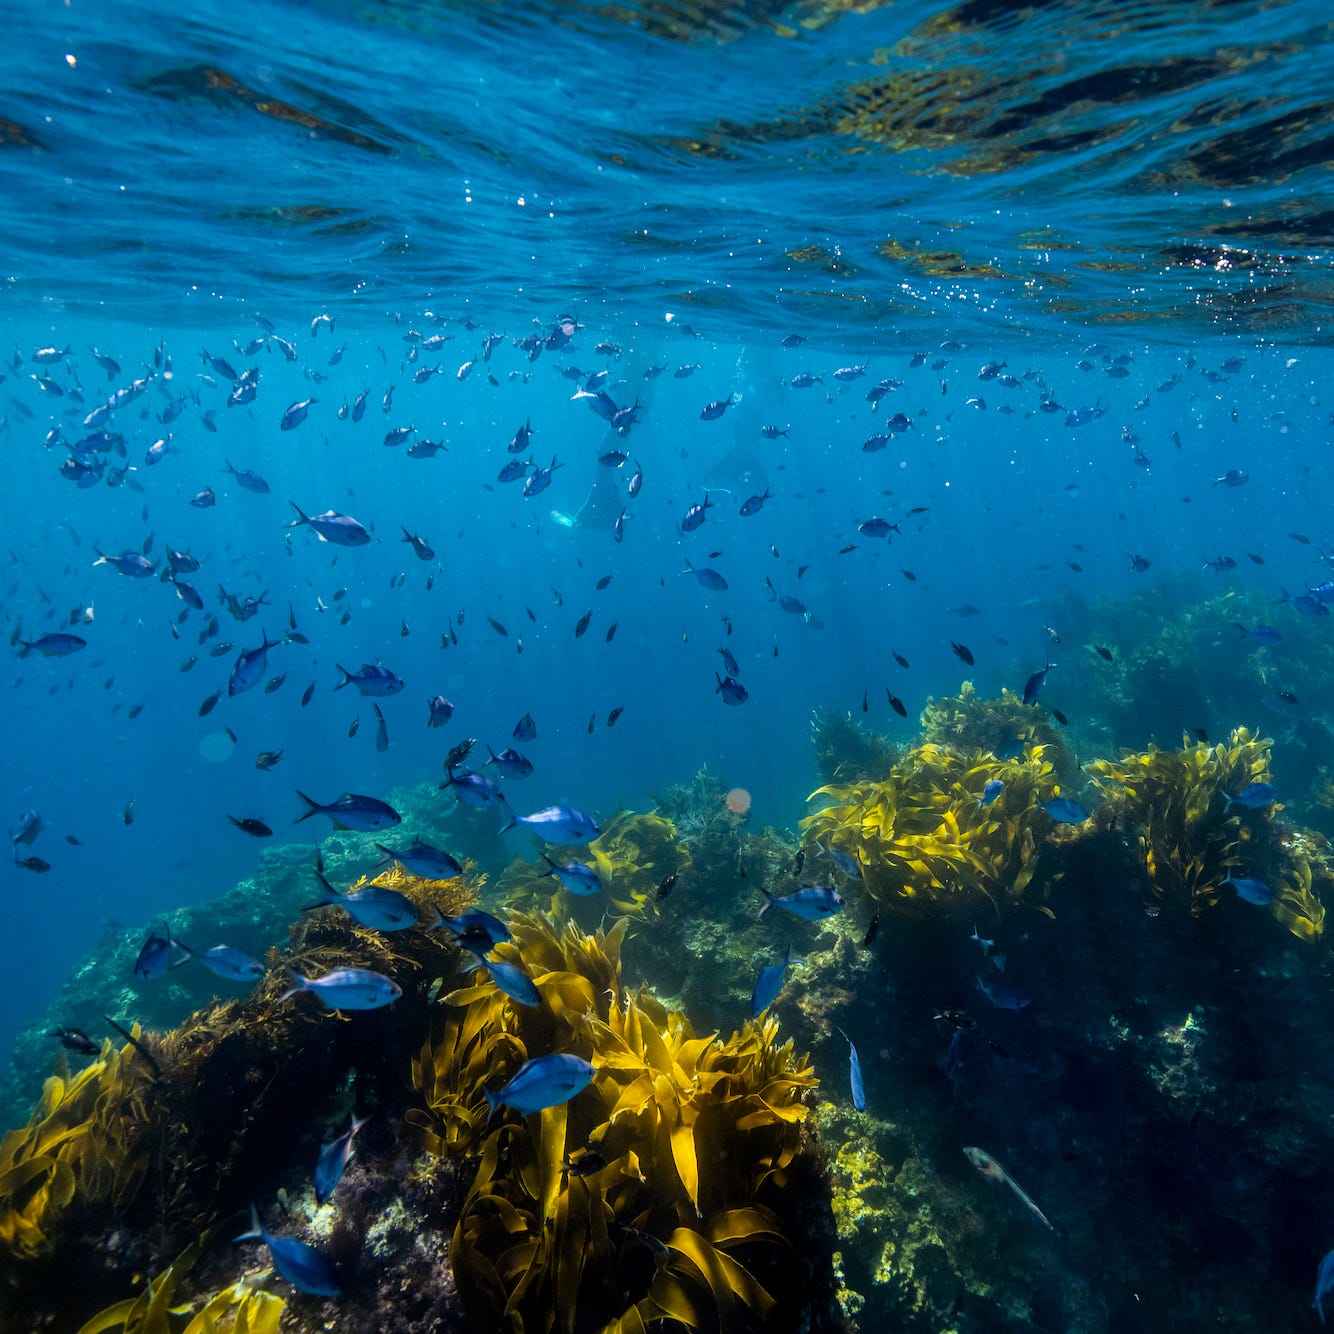 The Poor Knight's Islands are part of a marine reserve where marine wildlife is protected.